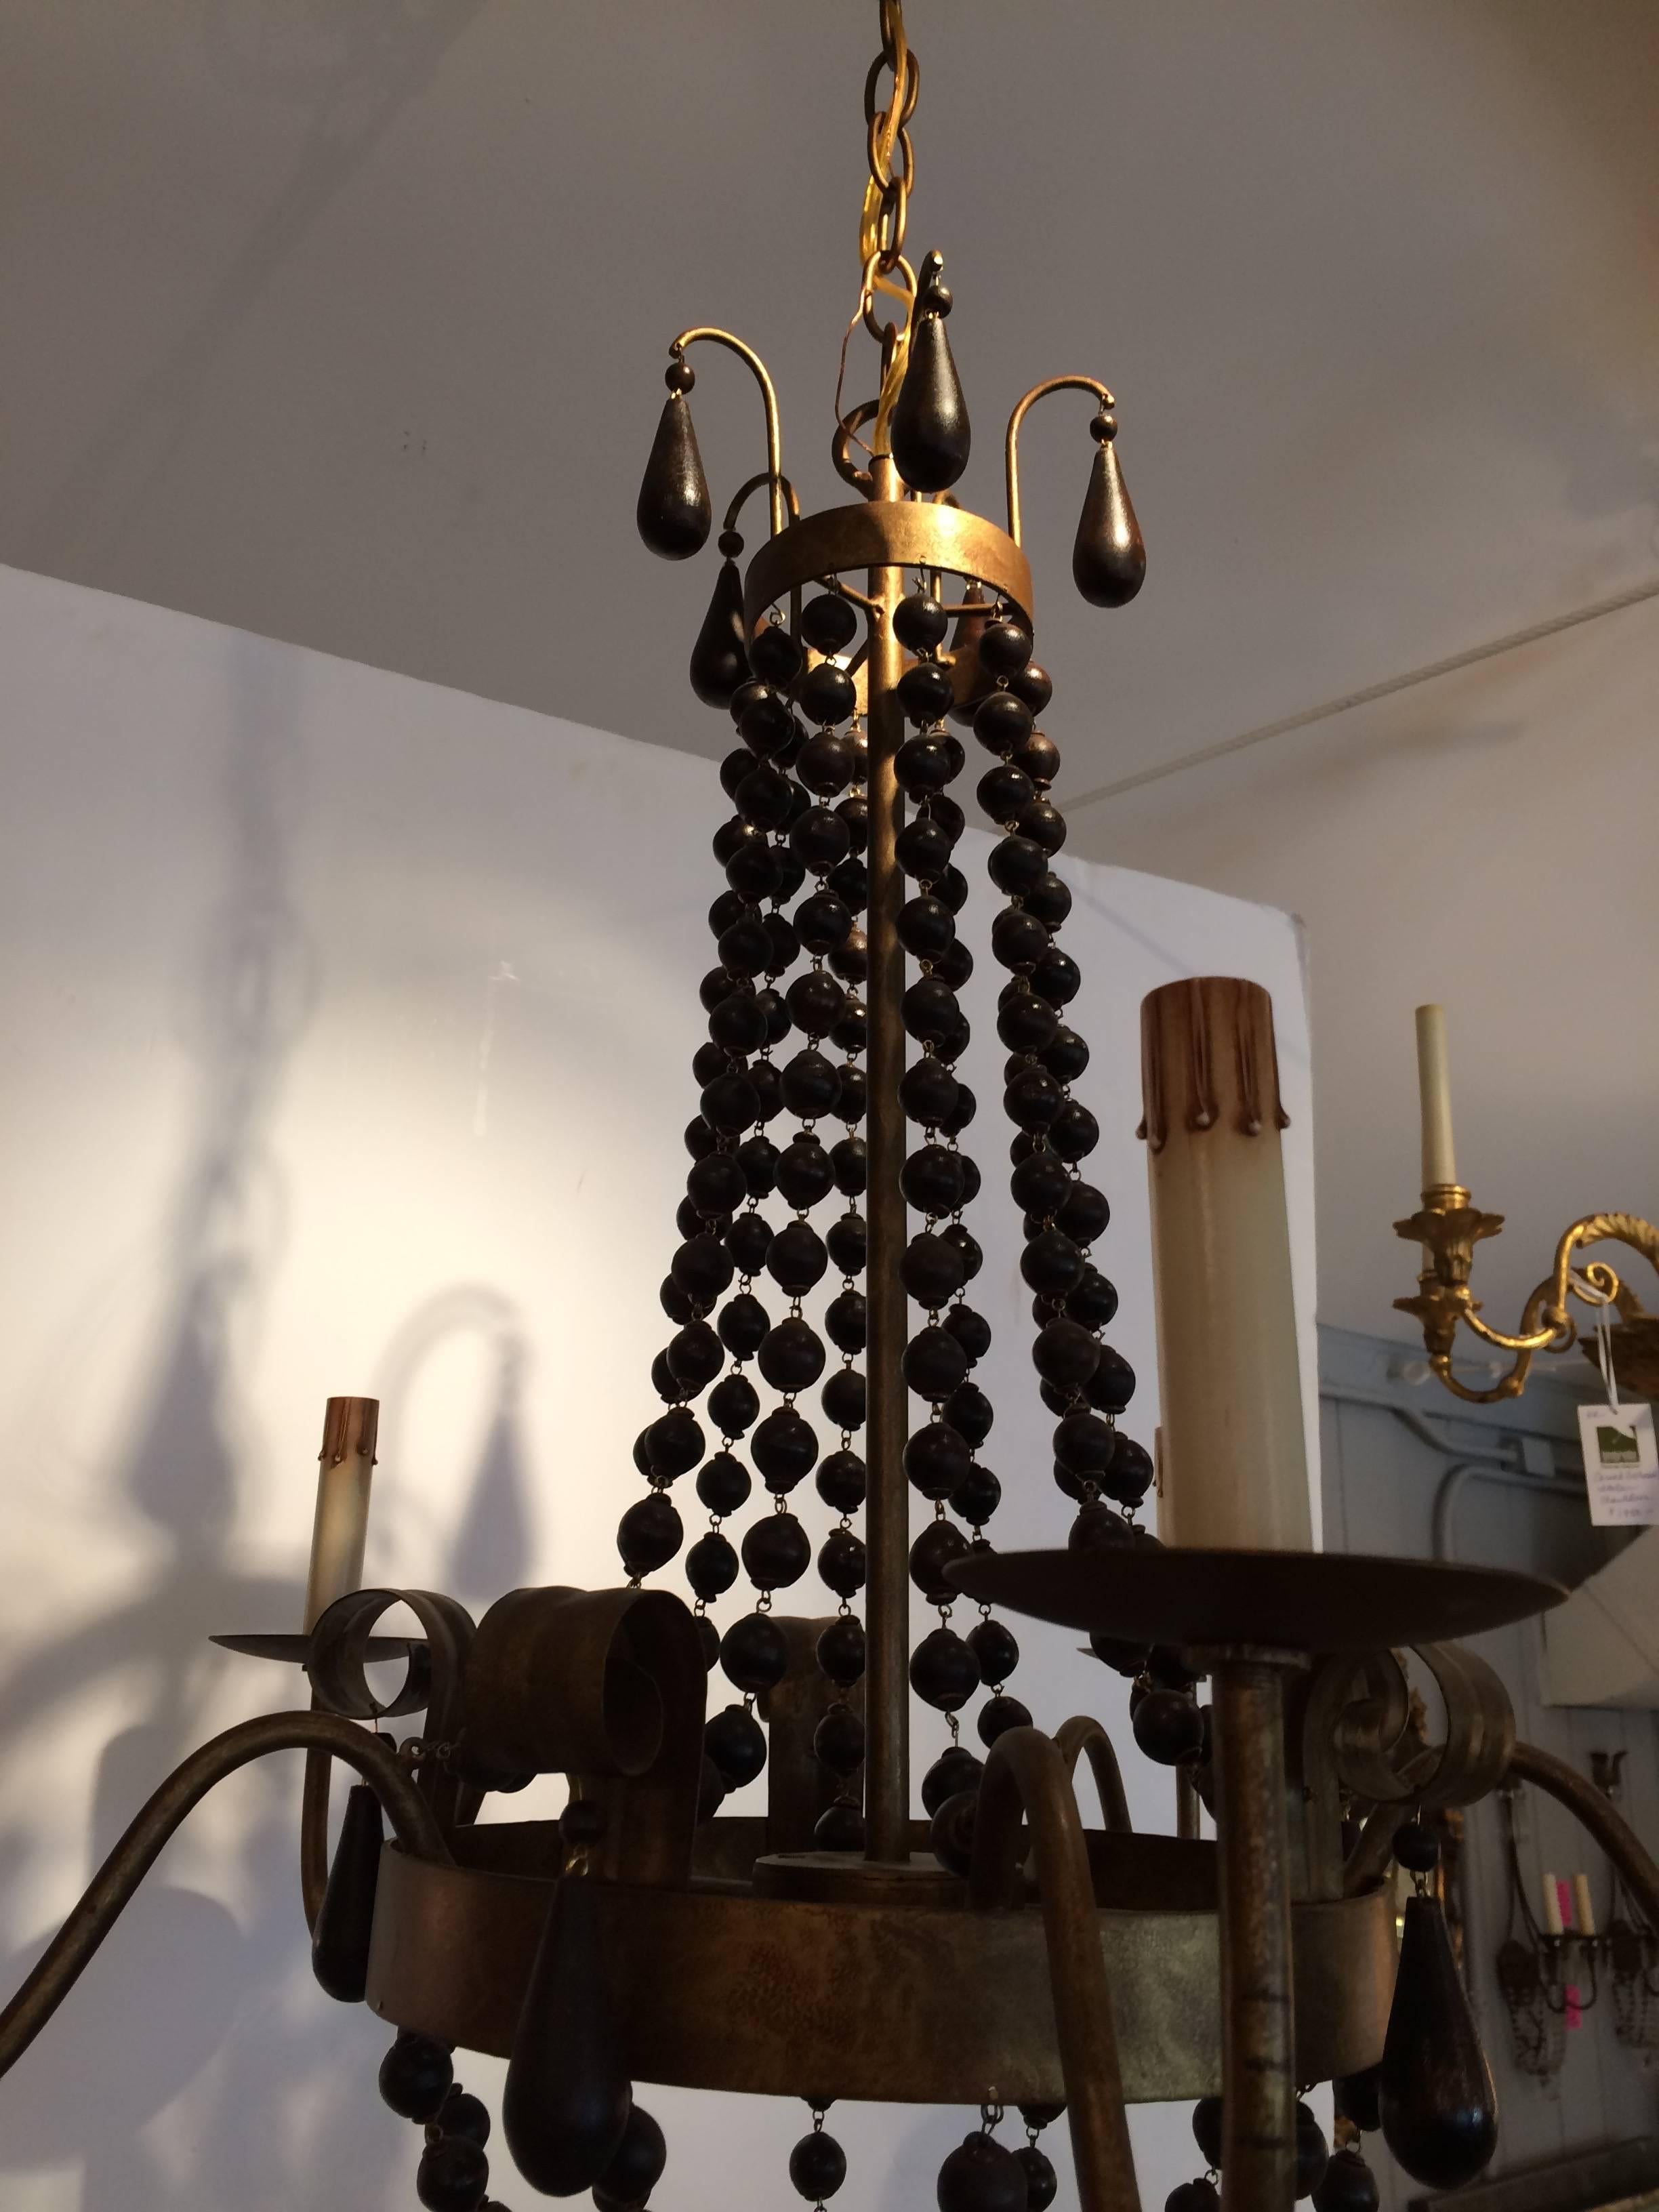 Great looking transitional chandelier having four iron arms and wonderful cascades of brown wooden beads to make an elongated elegant statement.